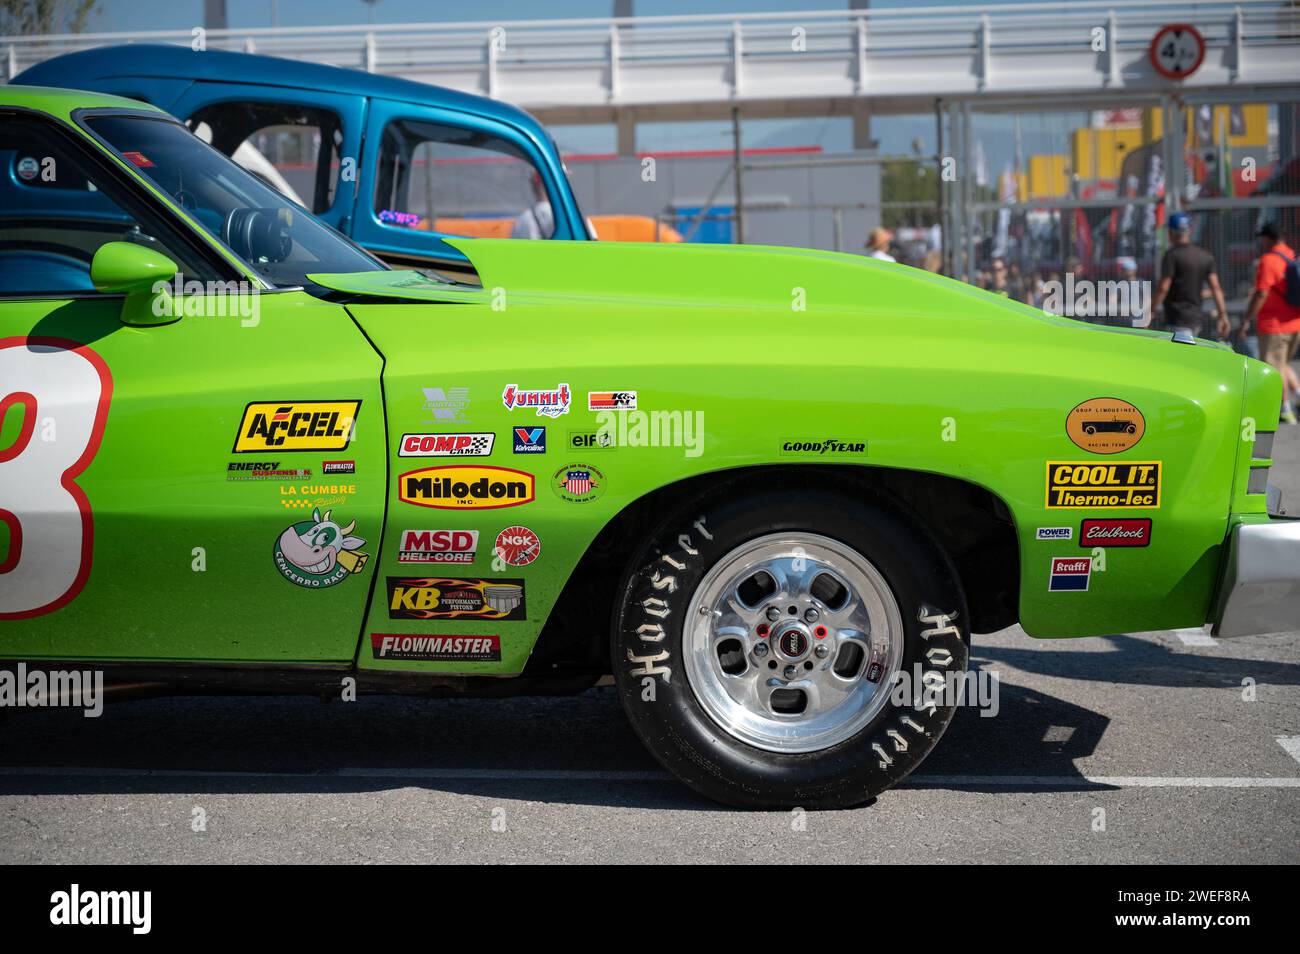 the stickers and sponsors of the green second-generation Chevrolet Montecarlo American muscle car prepared for quarter-mile acceleration races Stock Photo